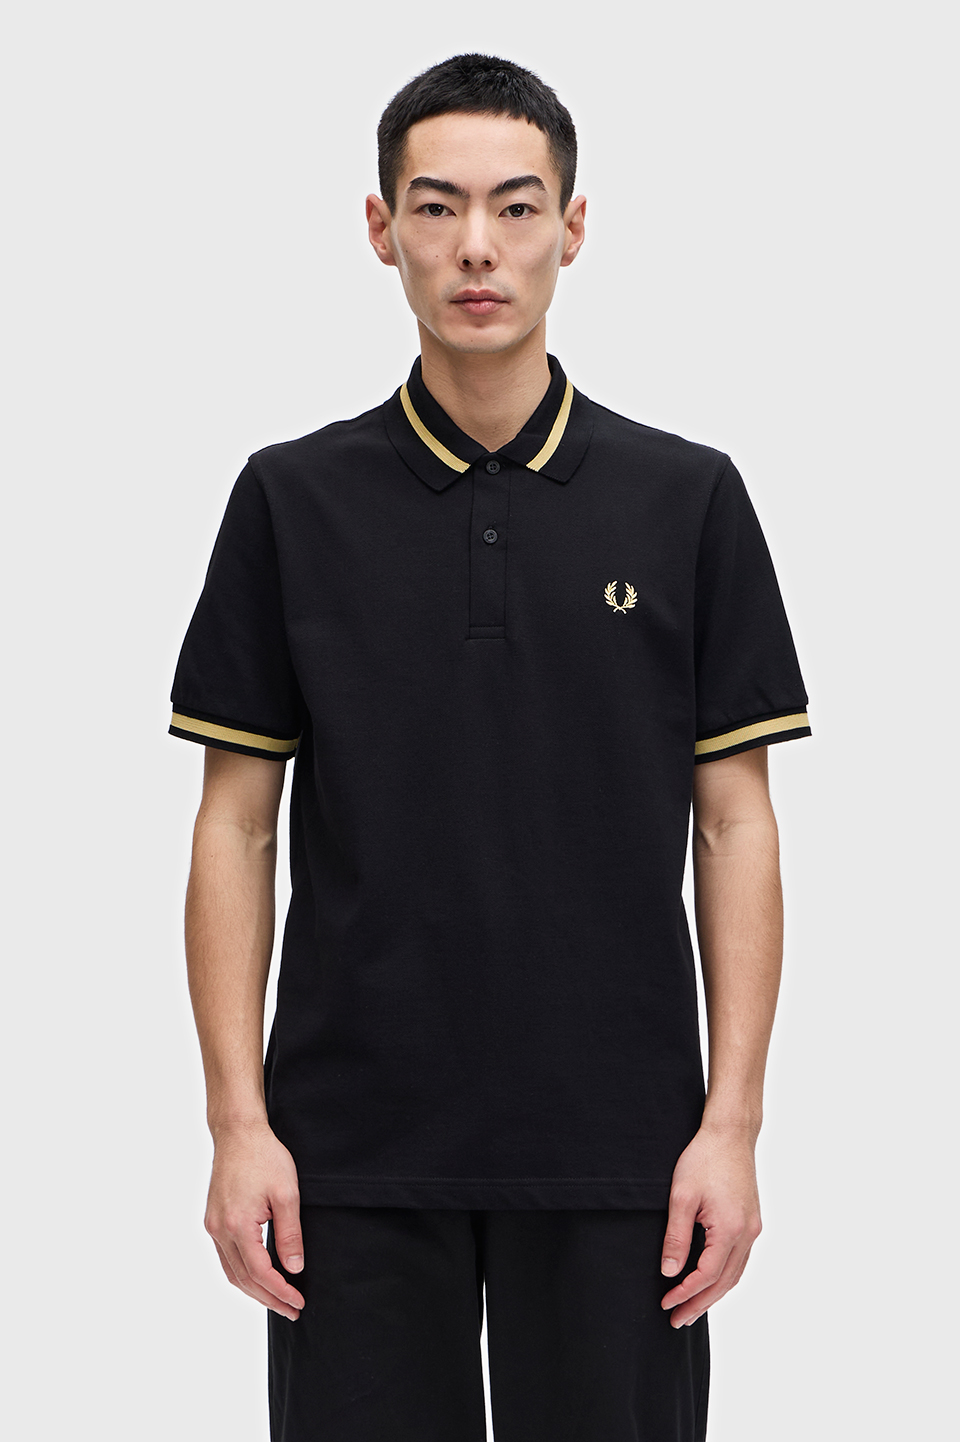 The Fred Perry Shirt - M2(36 157：BLACK / CHAMP / CHAMP): | FRED